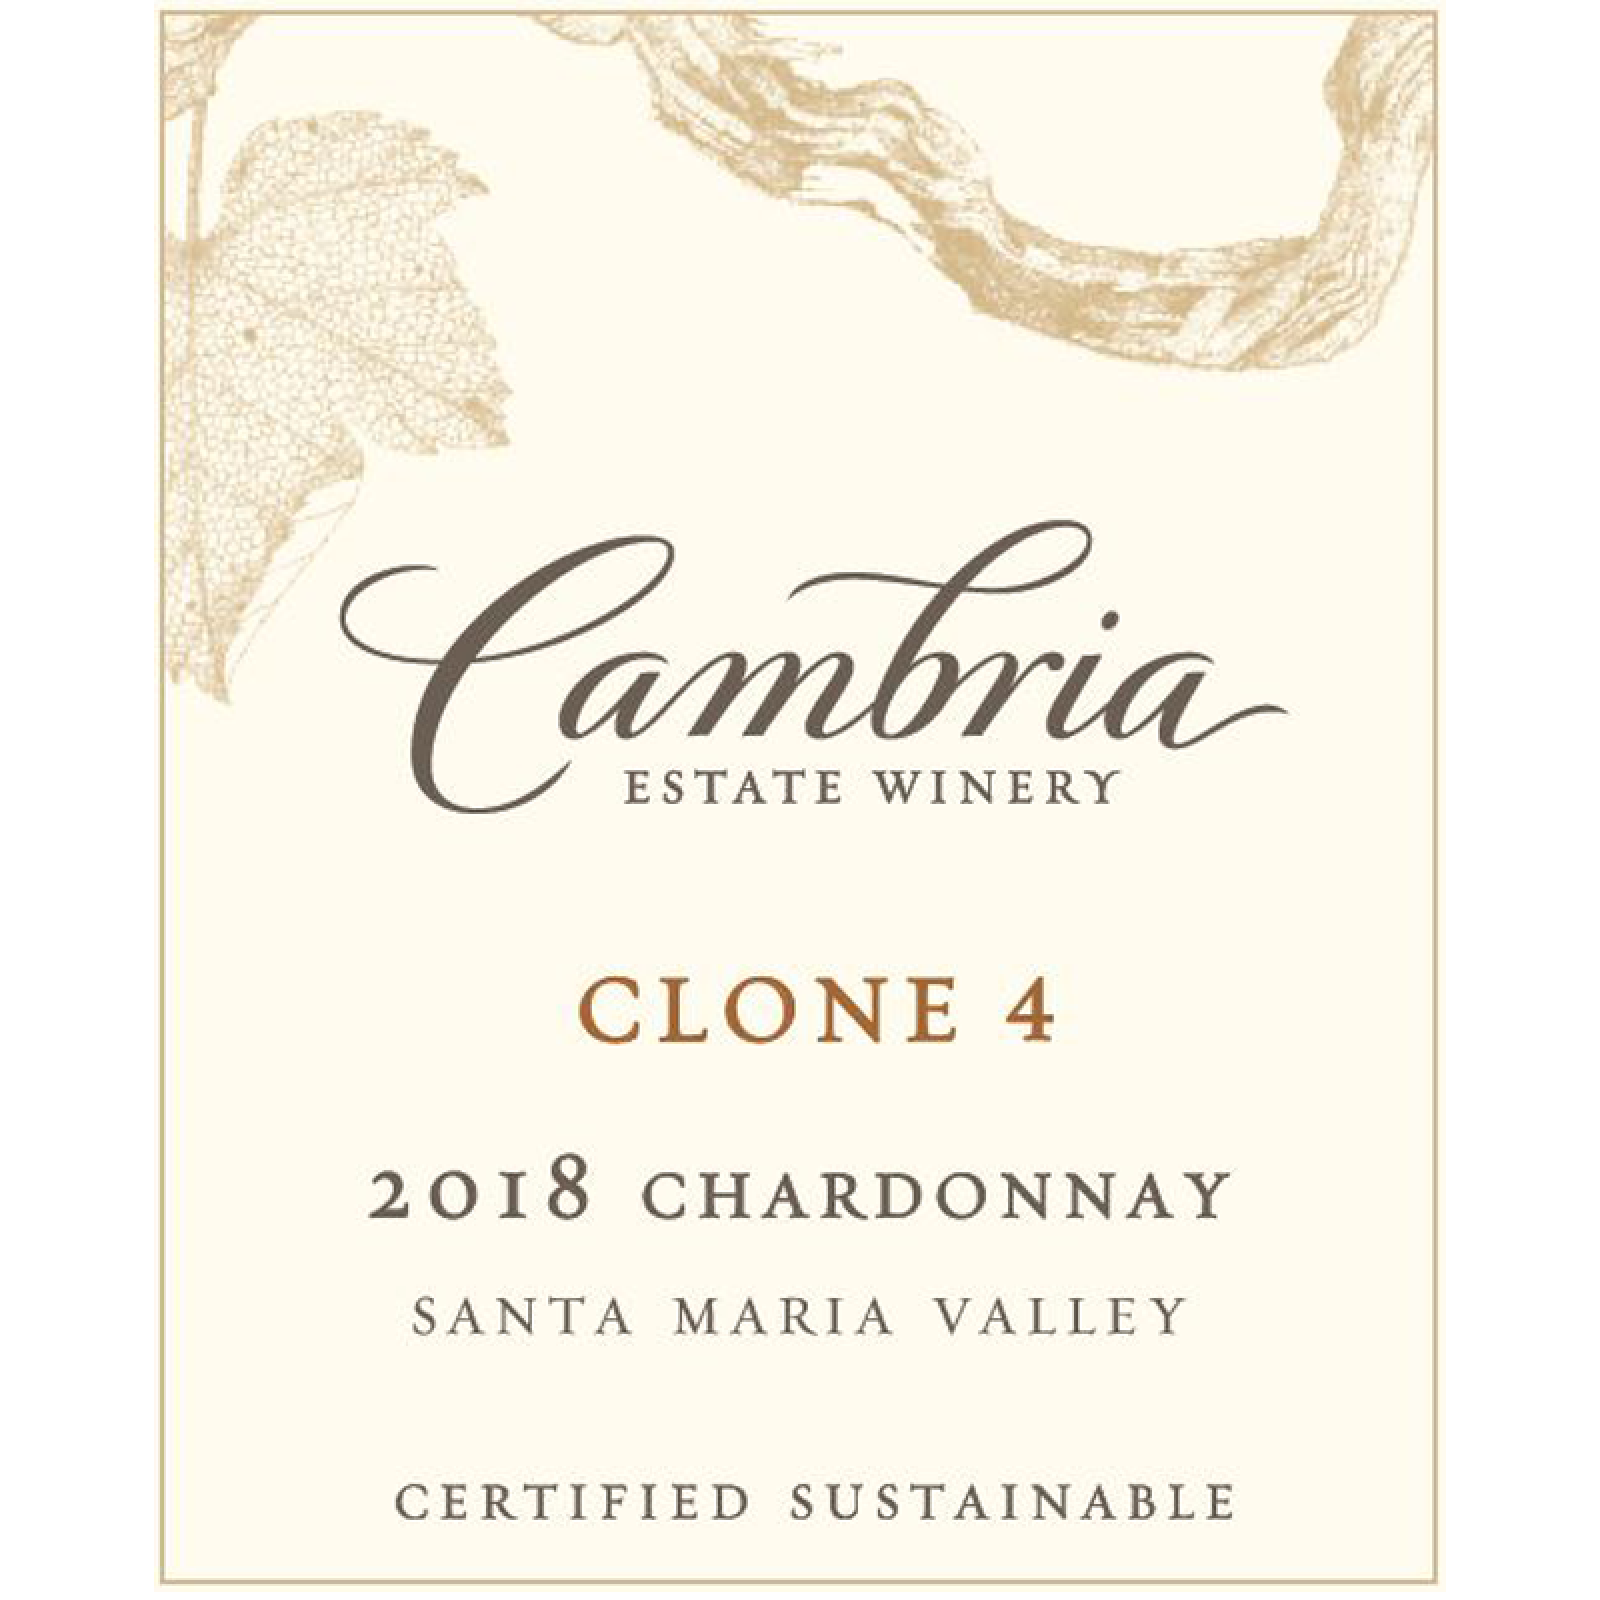 2018 Cambria Winery Clone 4 (Seeds of Empowerment) Chardonnay 